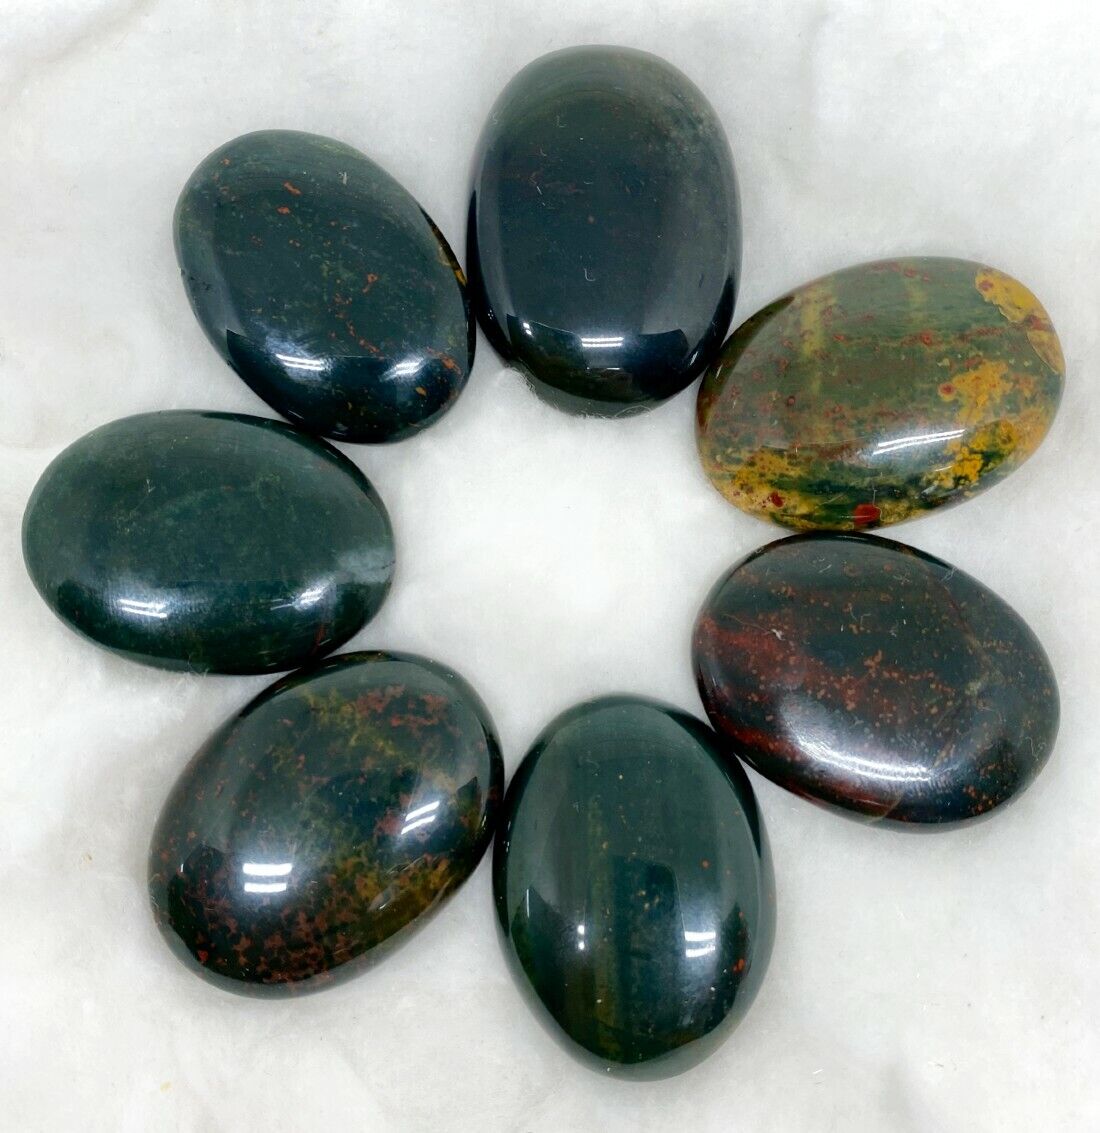 One(1) Natural Bloodstone Worry Stone, Thumb Stone.